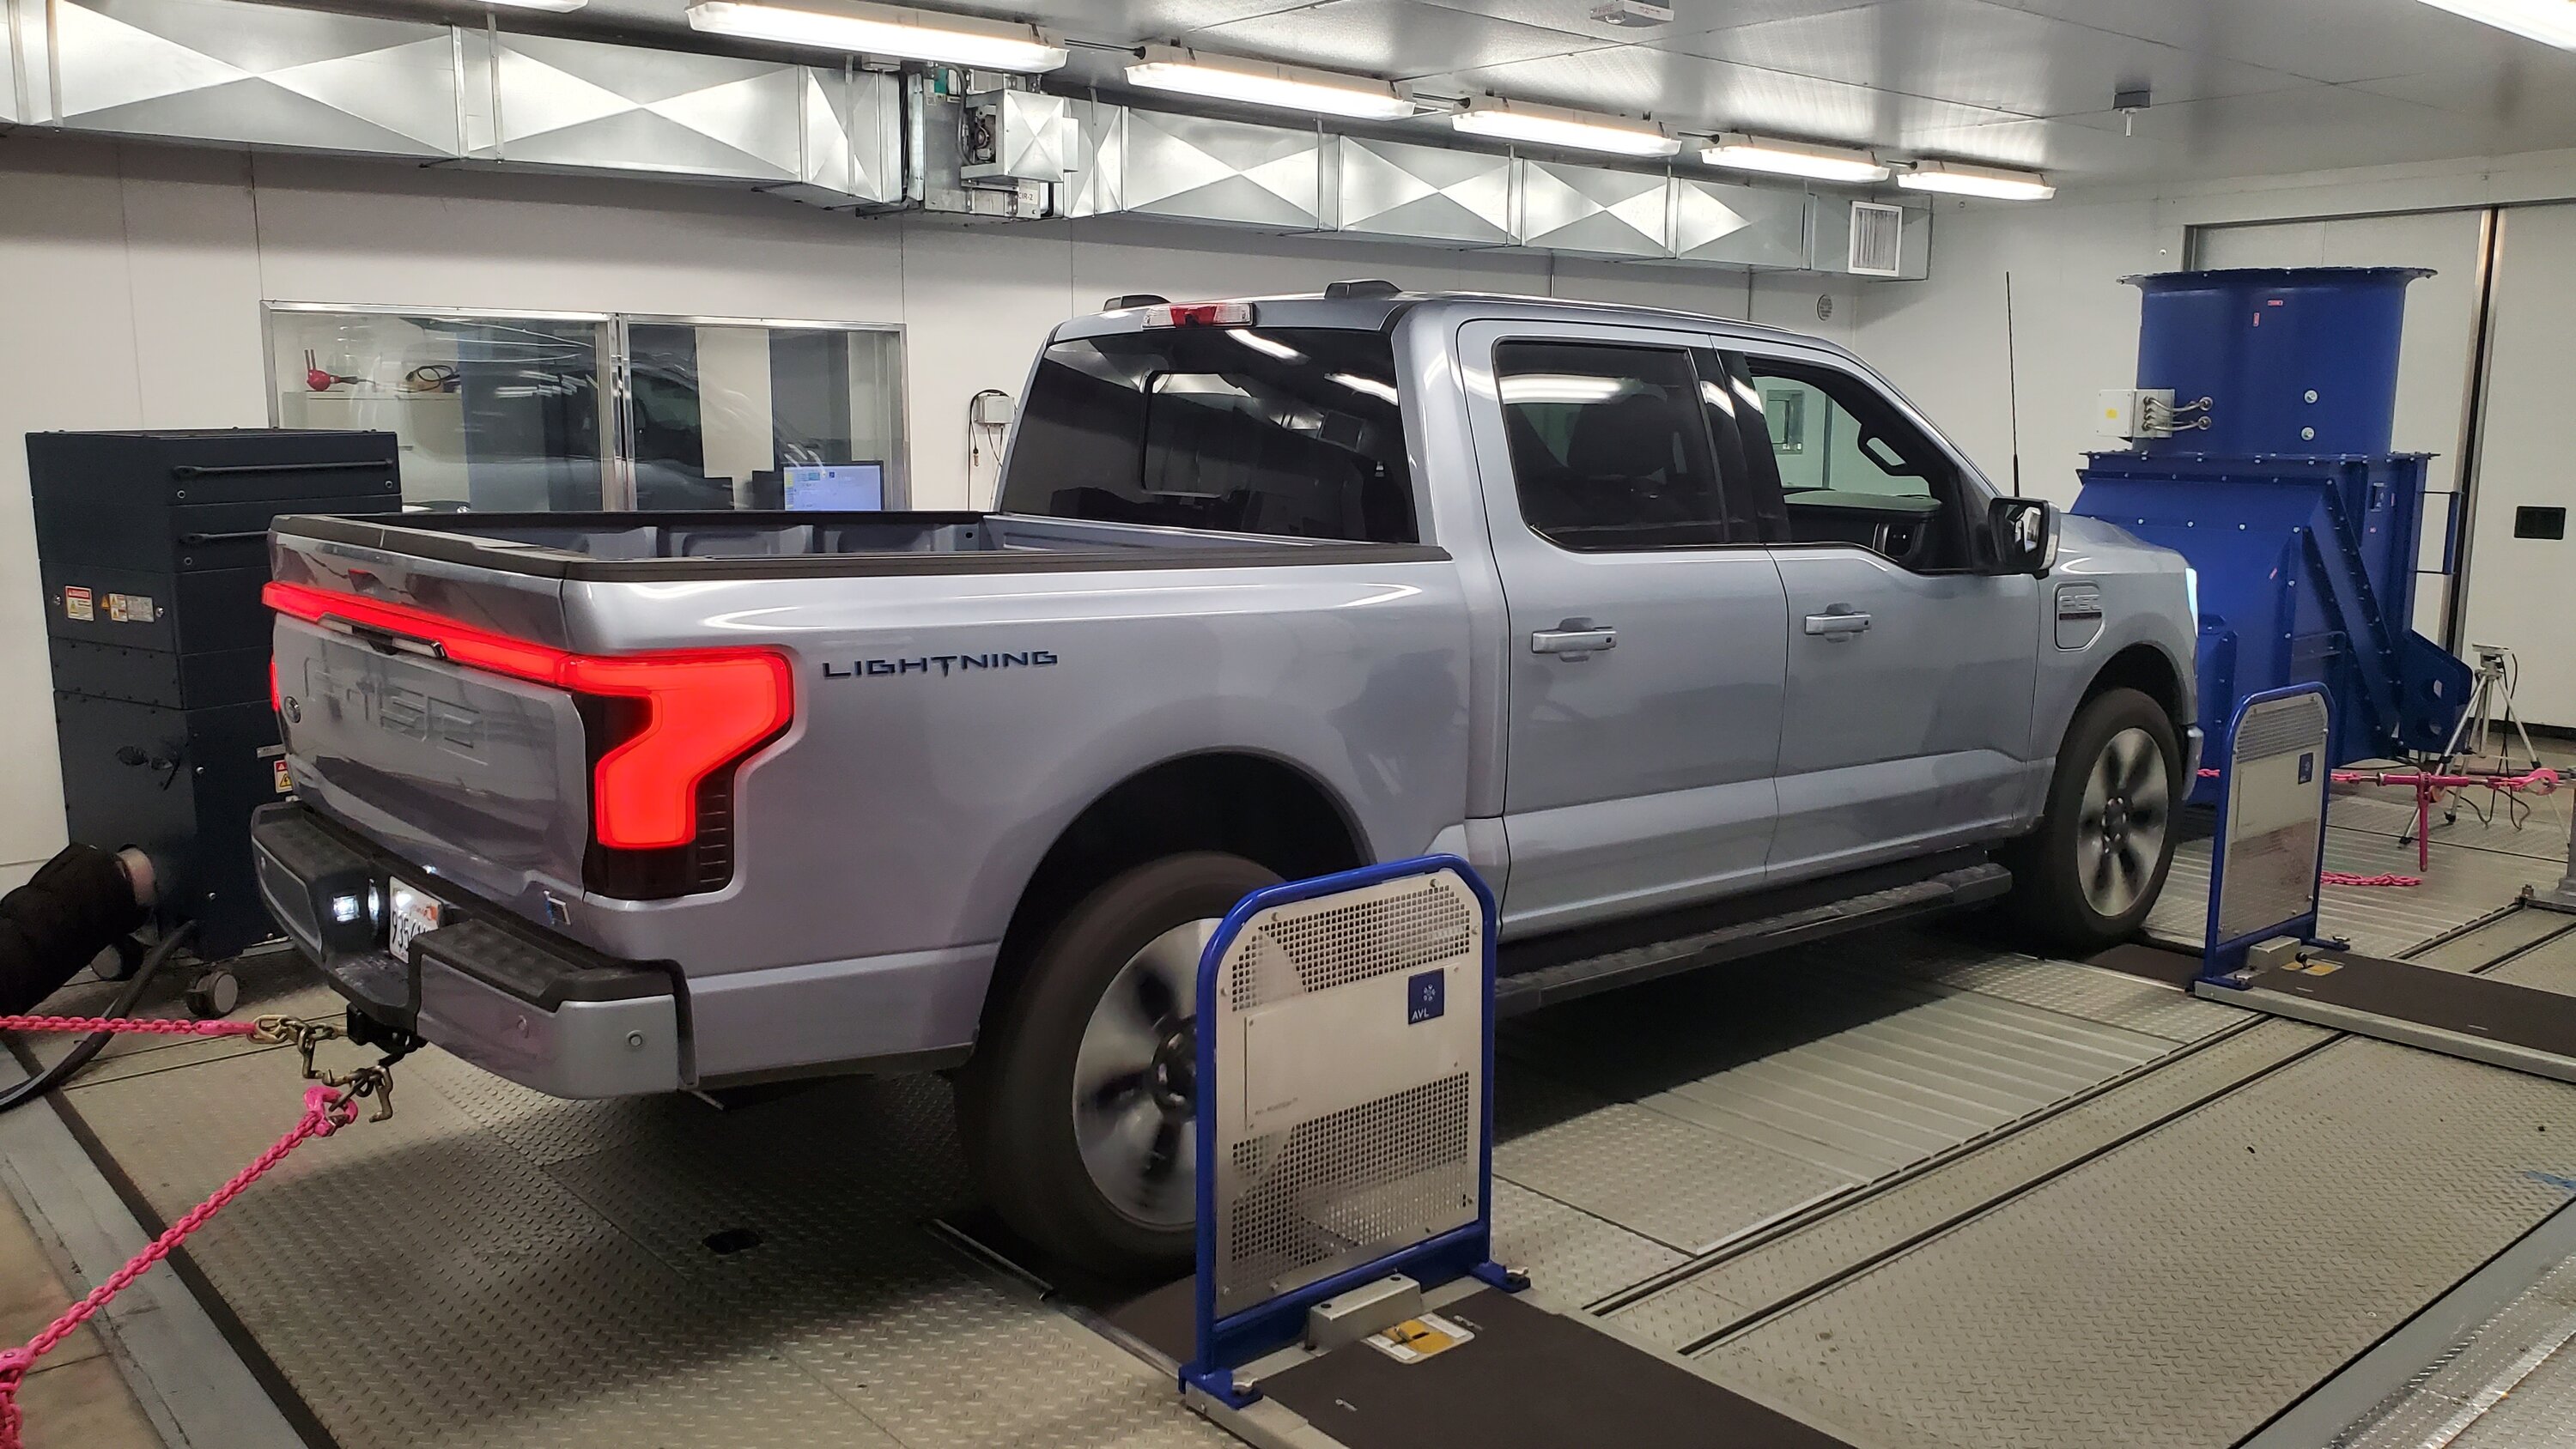 Report: F-150 Lightning loses about quarter of its range when carrying  maximum payload  Ford Lightning Forum For F-150 Lightning EV Pickup: News,  Owners, Discussions, Community